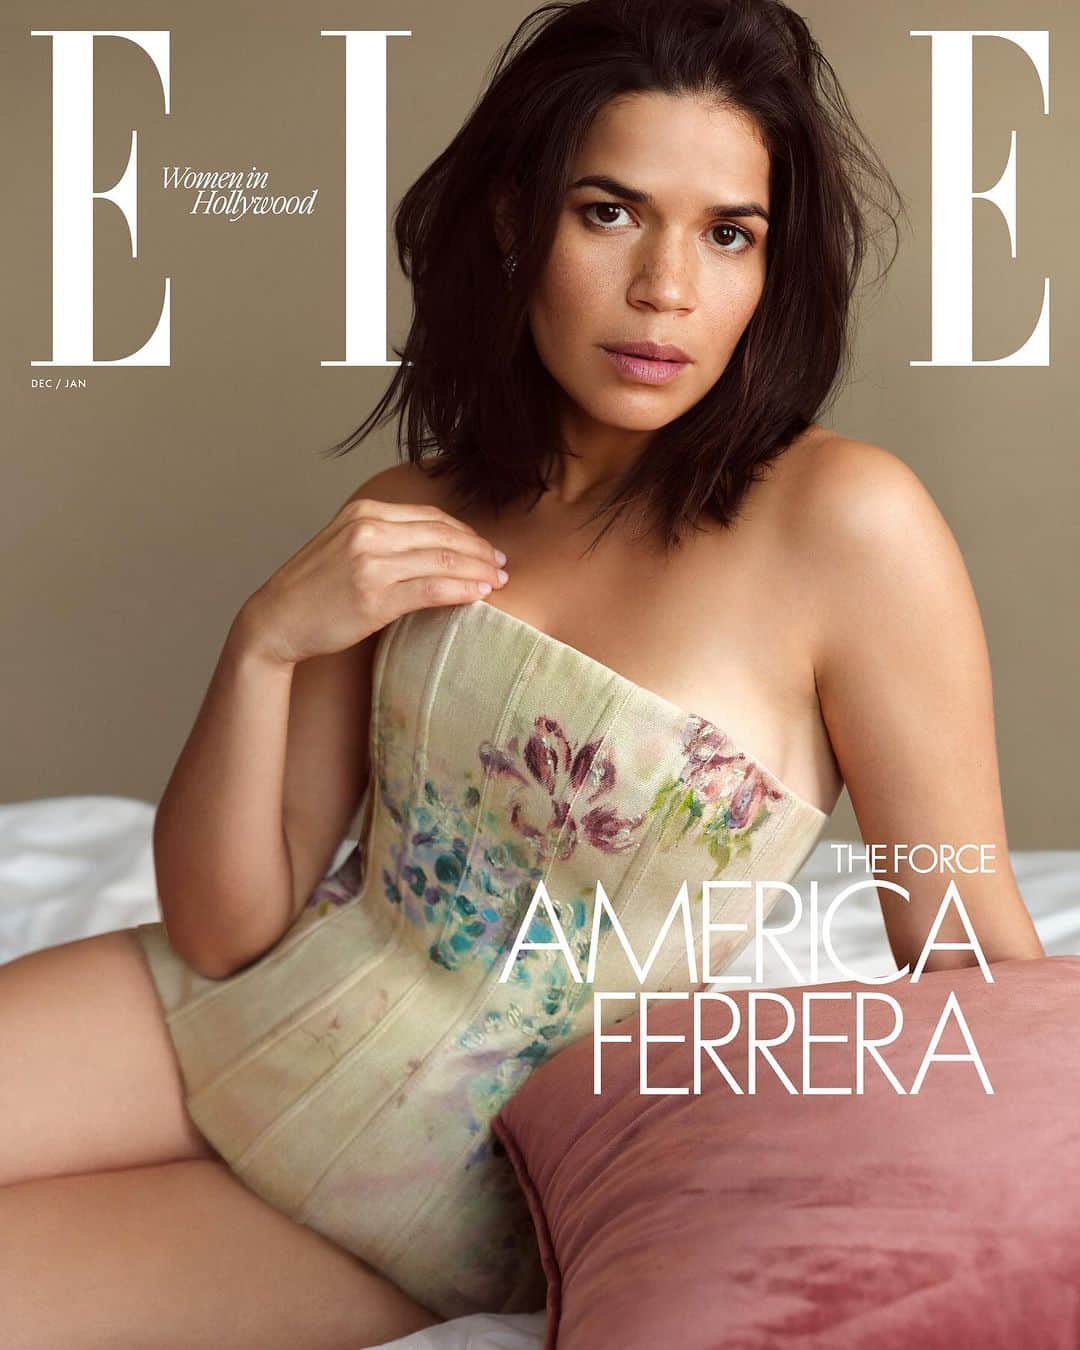 ELLE Magazineさんのインスタグラム写真 - (ELLE MagazineInstagram)「ELLE’s Women in Hollywood is our celebration of the women we loved watching this year. #AmericaFerrera’s latest roles have allowed her to go beyond the limits that others set. “What I continue to wish for my career, and women’s careers and people of color’s careers, is that we don’t have to exist inside of these boxes or these lanes,” she says. #JodieFoster, after five decades in the industry, is relishing the feeling of letting go. “You might as well do more of the things you love, less of the things you hate, and stop beating yourself up for something you can’t control,” she says. And #LilyGladstone could become the first Native person nominated for a Best Actress Oscar for her star turn in #KillersoftheFlowerMoon. “If there’s any goal that I think I have maintained or sustained throughout, it’s just ‘Be happy.’ Be happy with what you’re doing, because it’s easy to be distracted by the trimmings and lose sight of why you’re doing it.”  Read more about #ELLEWIH at the link in bio. –  Our editors worked directly with the Screen Actors Guild during its recent strike to make sure we could honor women in Hollywood while still adhering to union guidelines.  ELLE: @elleusa Editor-in-Chief: Nina Garcia @ninagarcia Talent: America Ferrera, Jodie Foster, Lily Gladstone @americaferrera @lilygladstone Photographer: Zoey Grossman,  Mark Seliger @zoeygrossman @markseliger Stylist: Alex White, Arianne Phillips @alexwhiteedits @ariannephillips Writer: Kayla Webley Adler, Sara Austin, Terese Marie Mailhot @kaylaw @saradaustin @teresemariem Hair: Jenny Cho and Adir Abergel at A-Frame Agency, Bob Recine at The Wall Group @jennychohair @aframe_agency @hairbyadir @bobrecine @thewallgroup Makeup: Georgie Eisdell and Romy Soleimani at The Wall Group, Pati Dubroff for Chanel, @georgieeisdell @thewallgroup @patidubroff @chanel.beauty @romyglow Manicure: Ashlie Johnson and Casey Herman at The Wall Group @ashlie_johnson  @caseynails @thewallgroup Production: Lola Production, Ruth Levy and Madi Overstreet  @lolaproduction @boomboomlevy Set design: Jakob Bokulich @jakobbokulich Set: Kelly Infield @kellys_phone  On location: The Hollywood Roosevelt, Los Angeles @thehollywoodroosevelt」11月30日 22時01分 - elleusa